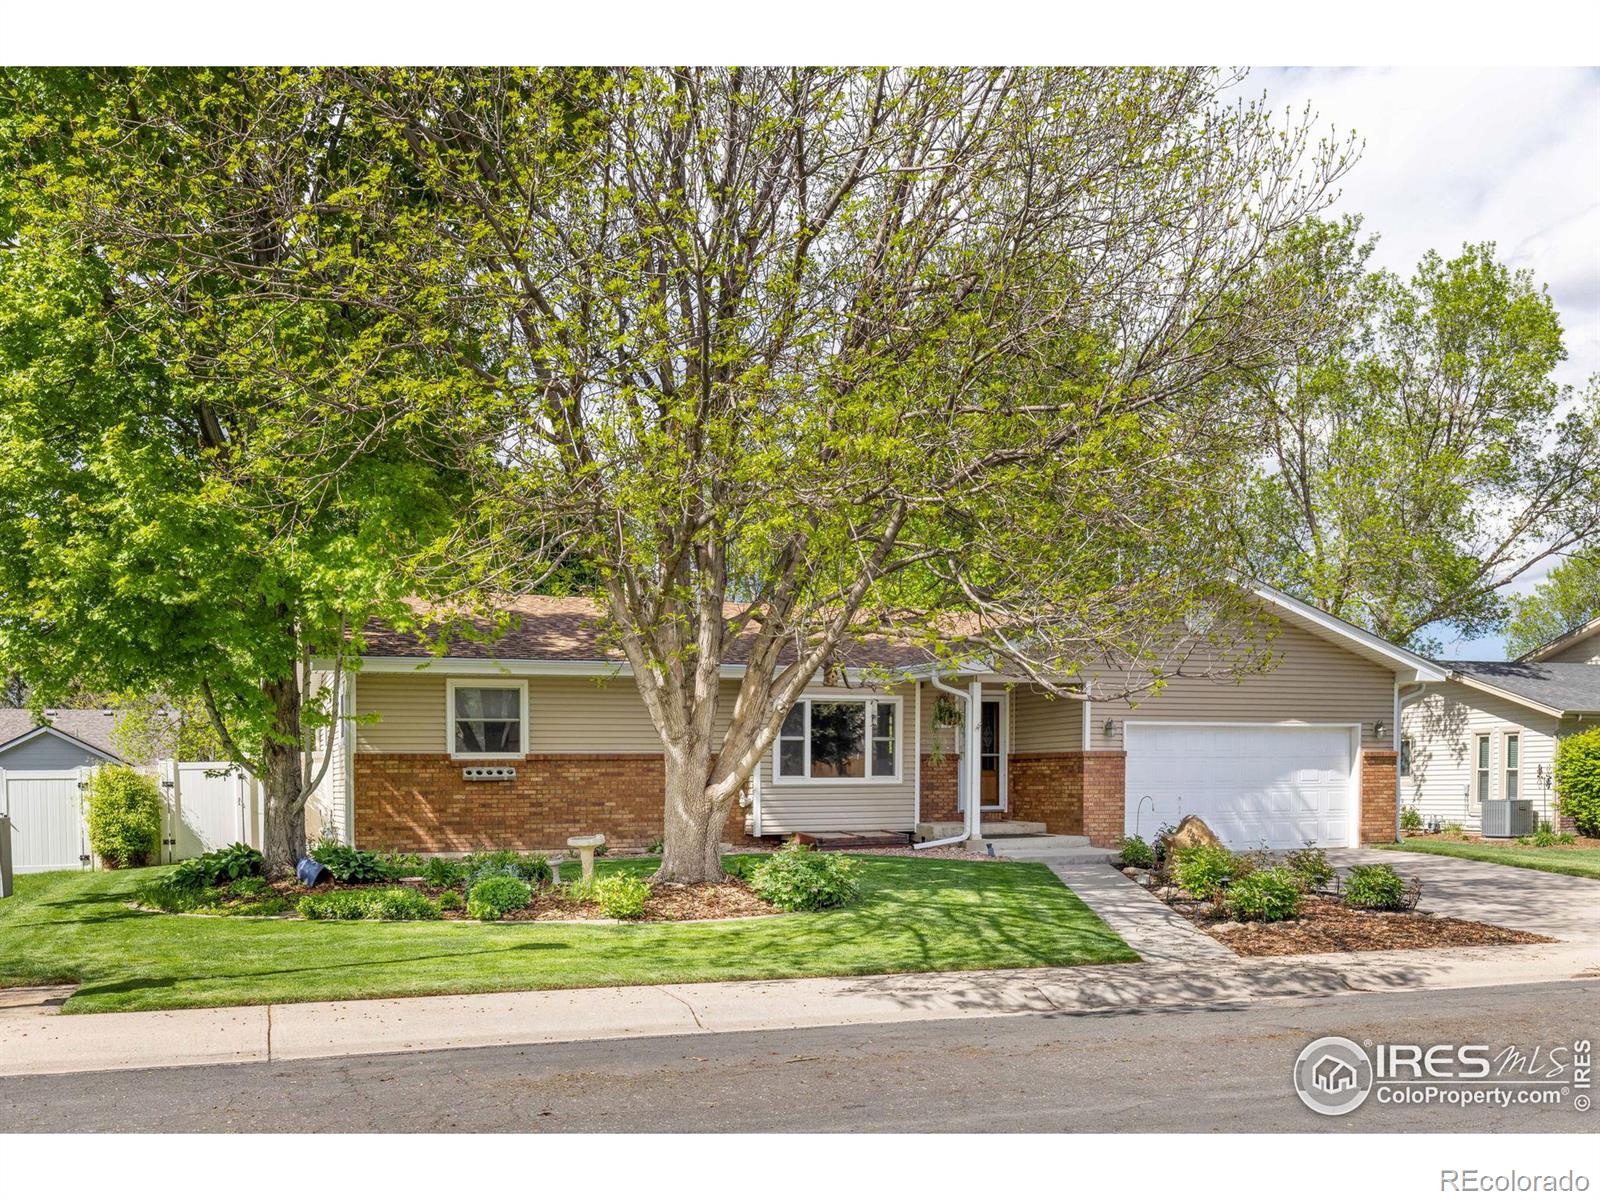 CMA Image for 4113 w 16th st rd,Greeley, Colorado